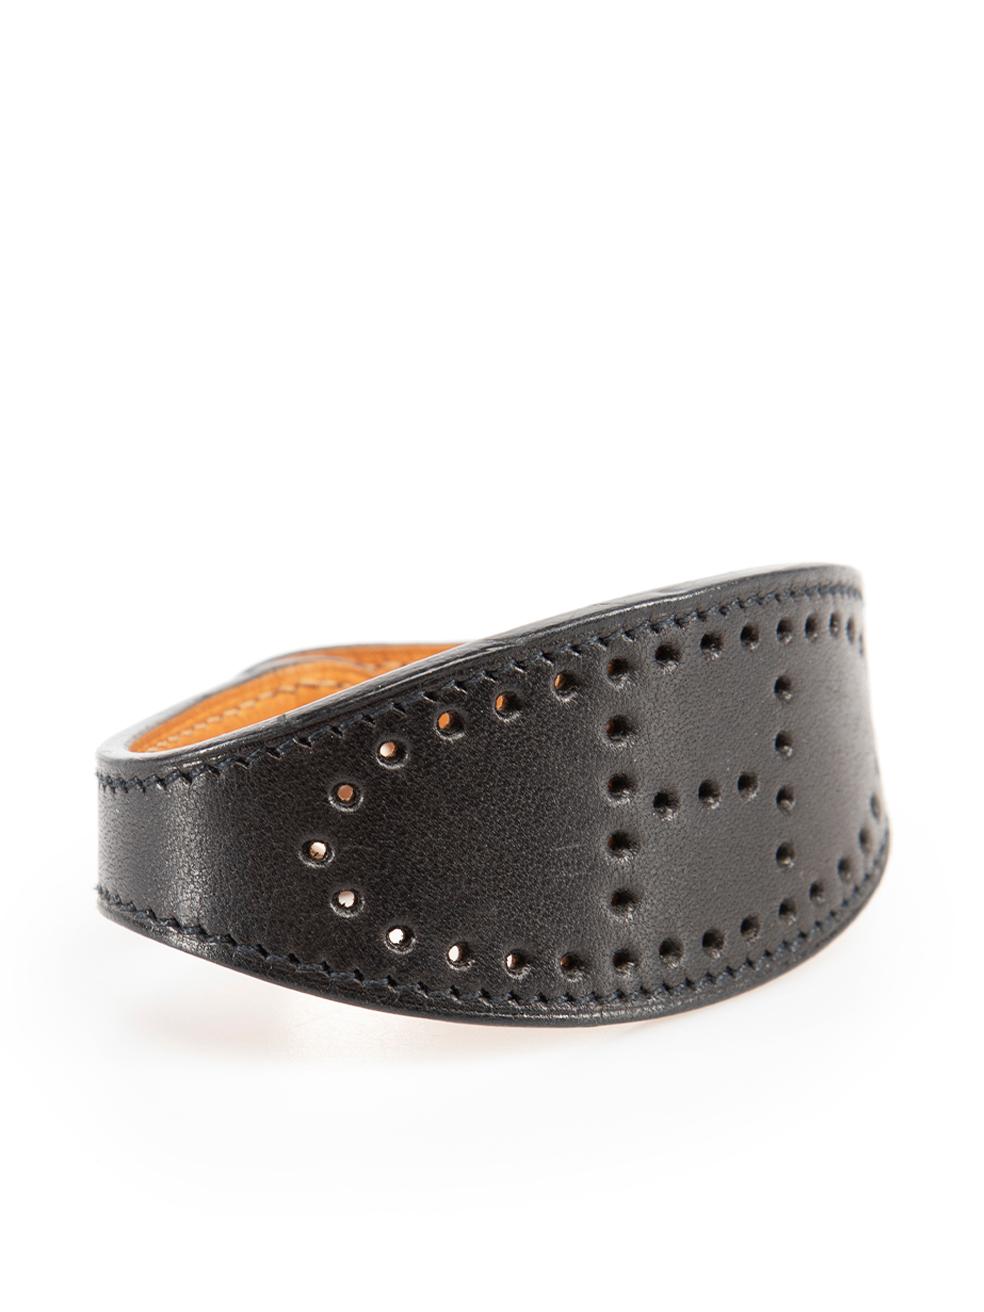 CONDITION is Very good. Minimal wear to bracelet is evident. Minimal wear to the leather underside with very light mark by the fastening on this used Hermès designer resale item.

Details
Evelyne
Black
Leather
Bracelet
Perforated logo detail
Snap